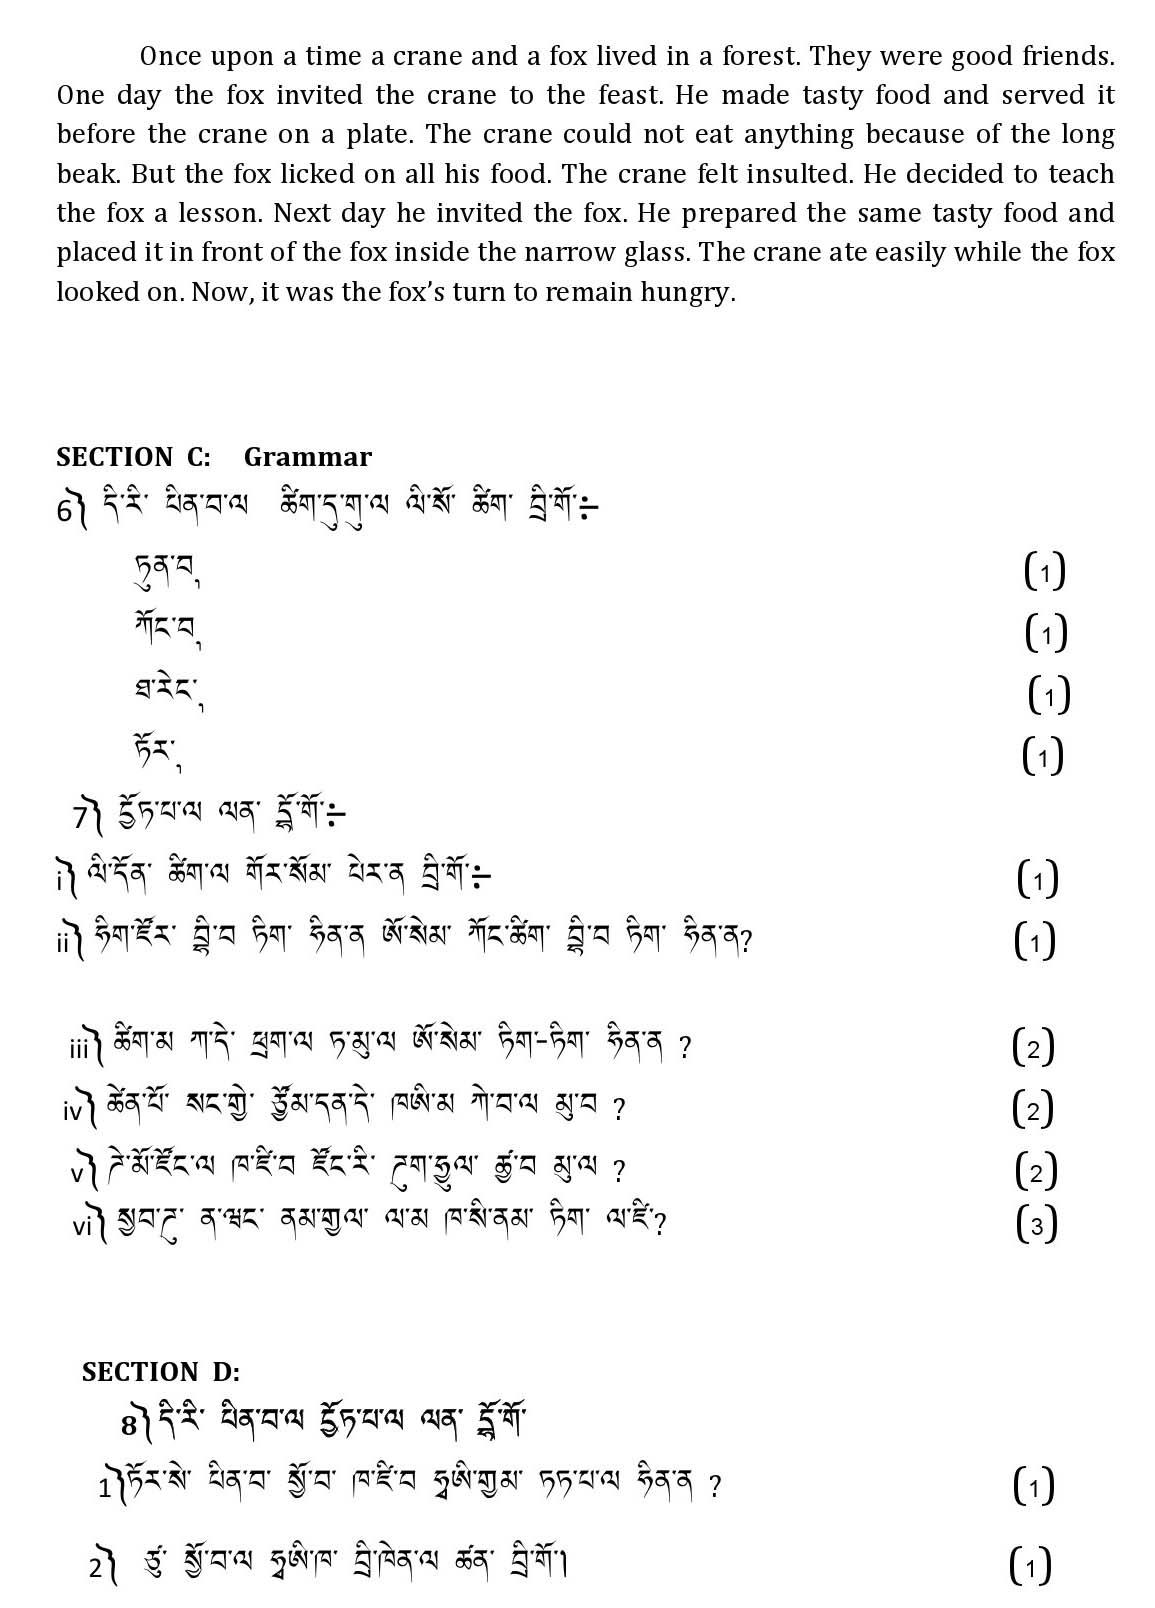 Tamang CBSE Class X Sample Question Paper 2019 20 - Image 3